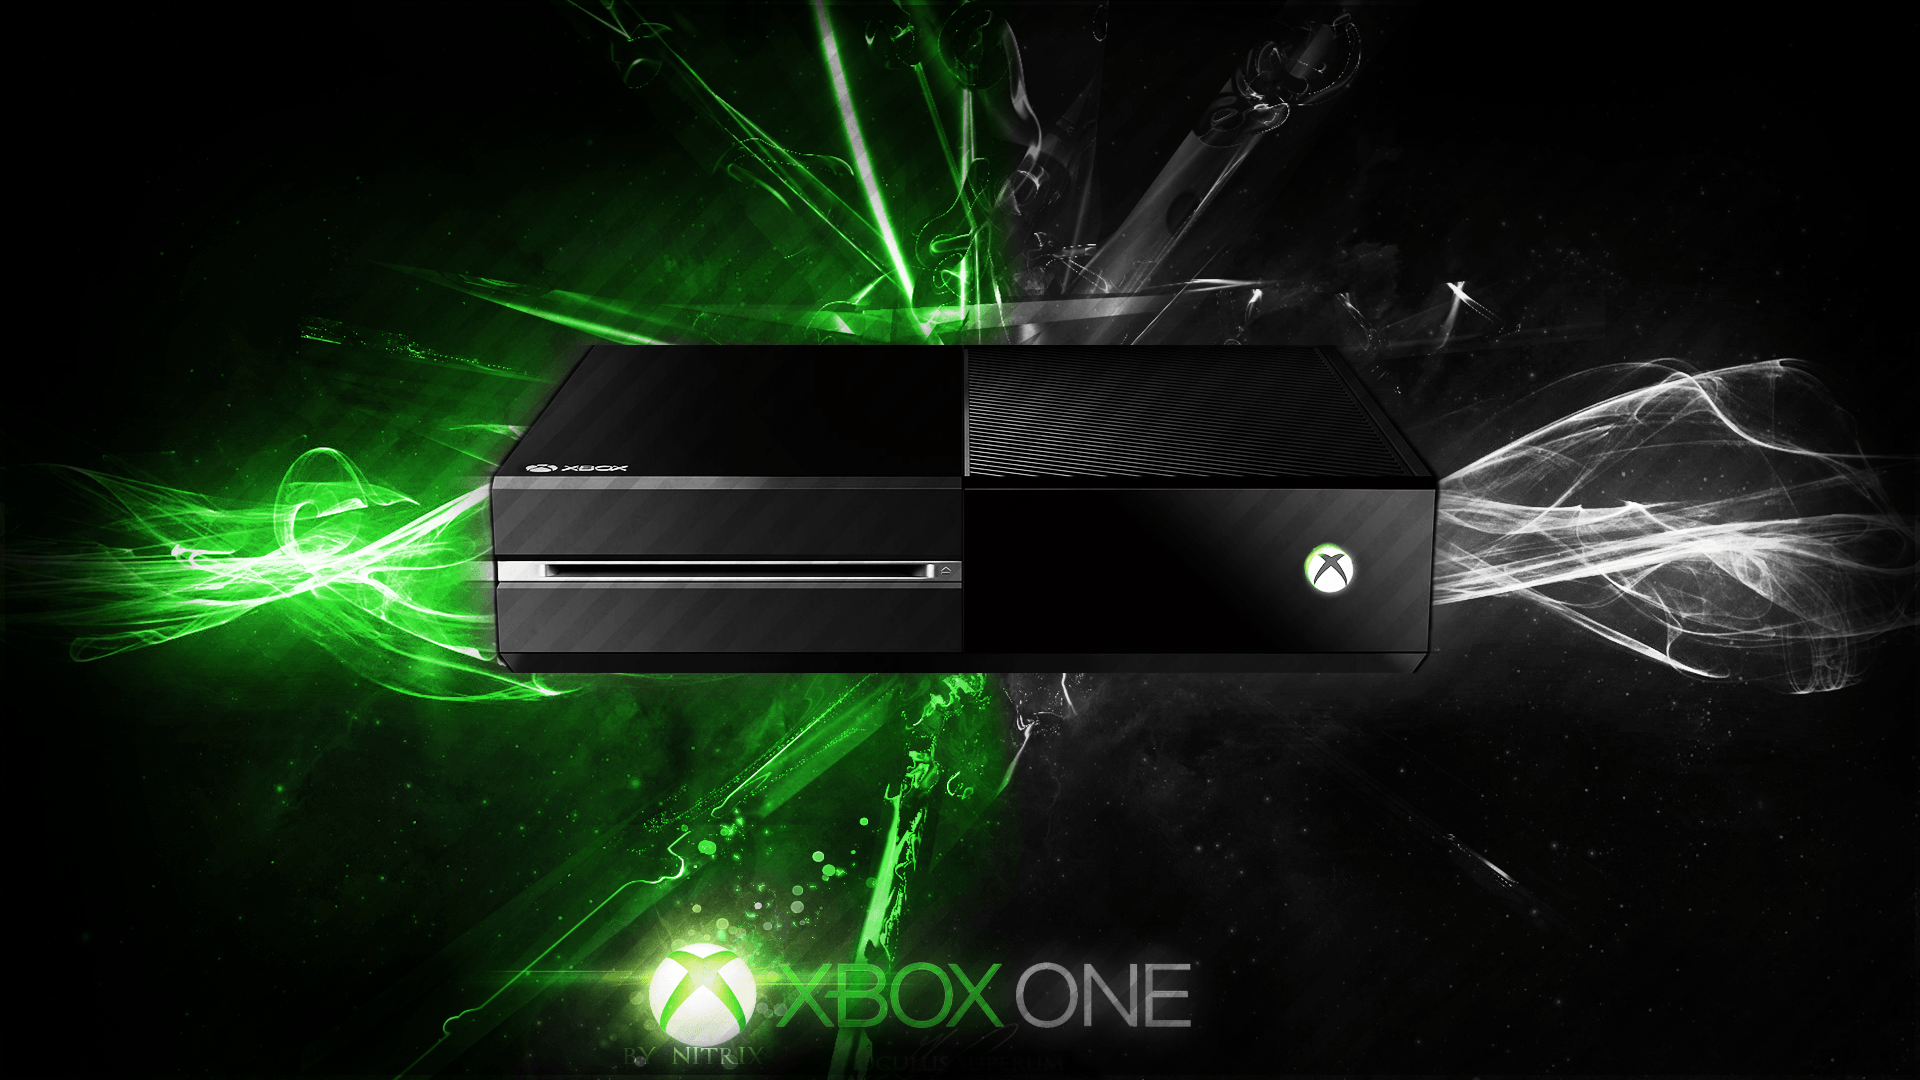 Xbox One Wallpapers, Great Photos of Xbox One 4K Ultra HD